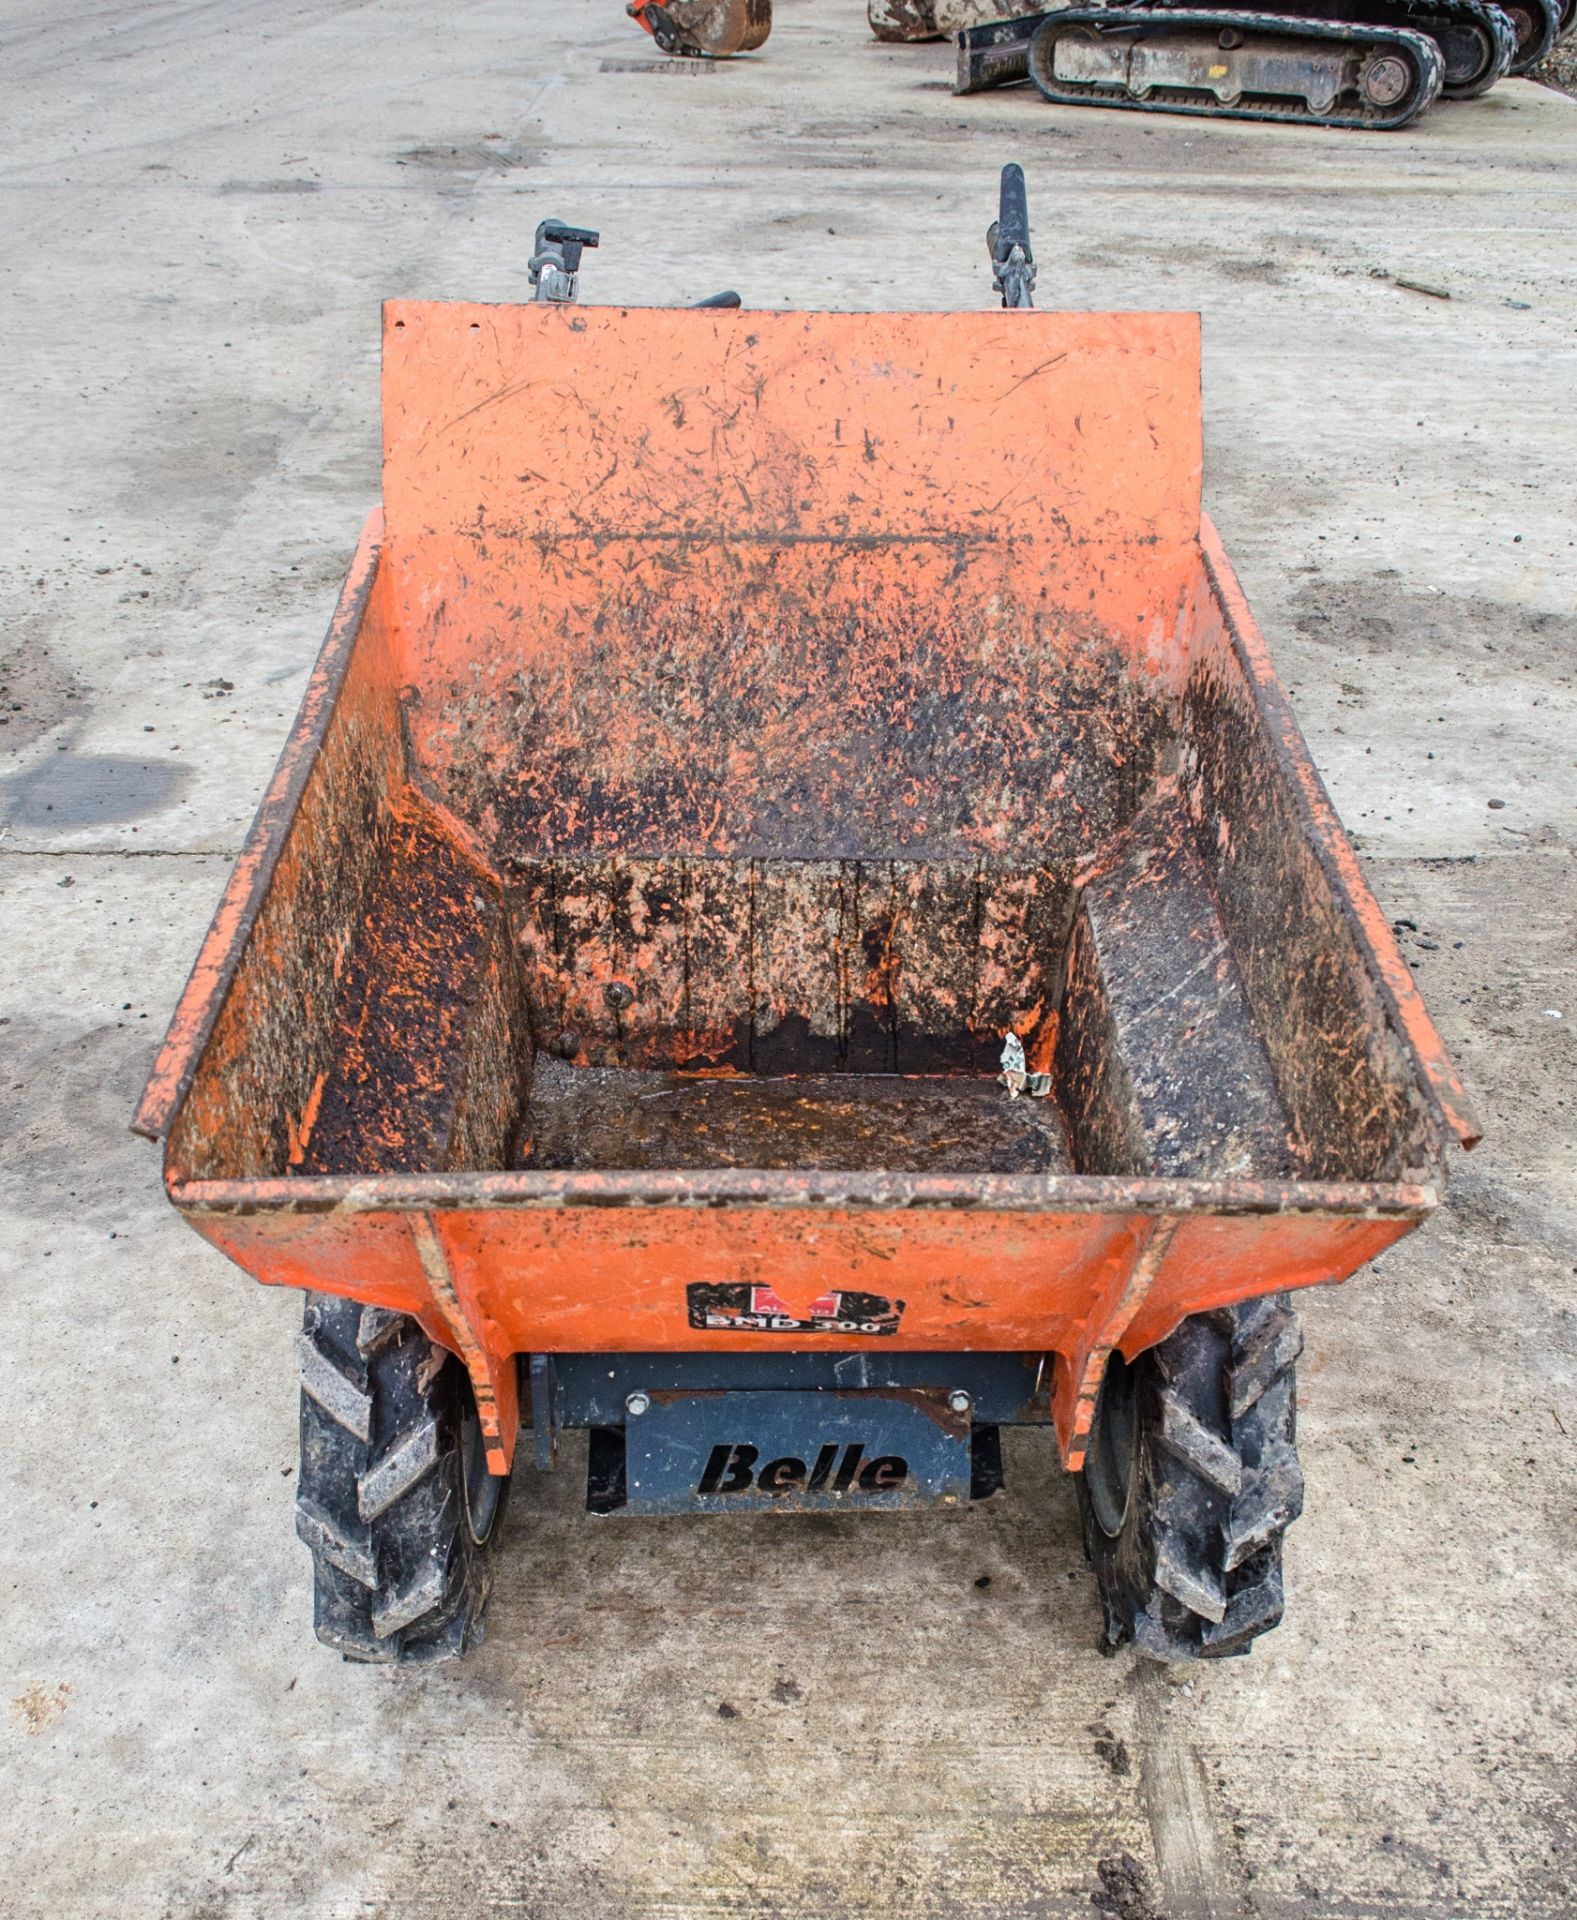 Belle BMD300 petrol driven power barrow Year: 2018 S/N: 148128 - Image 5 of 10